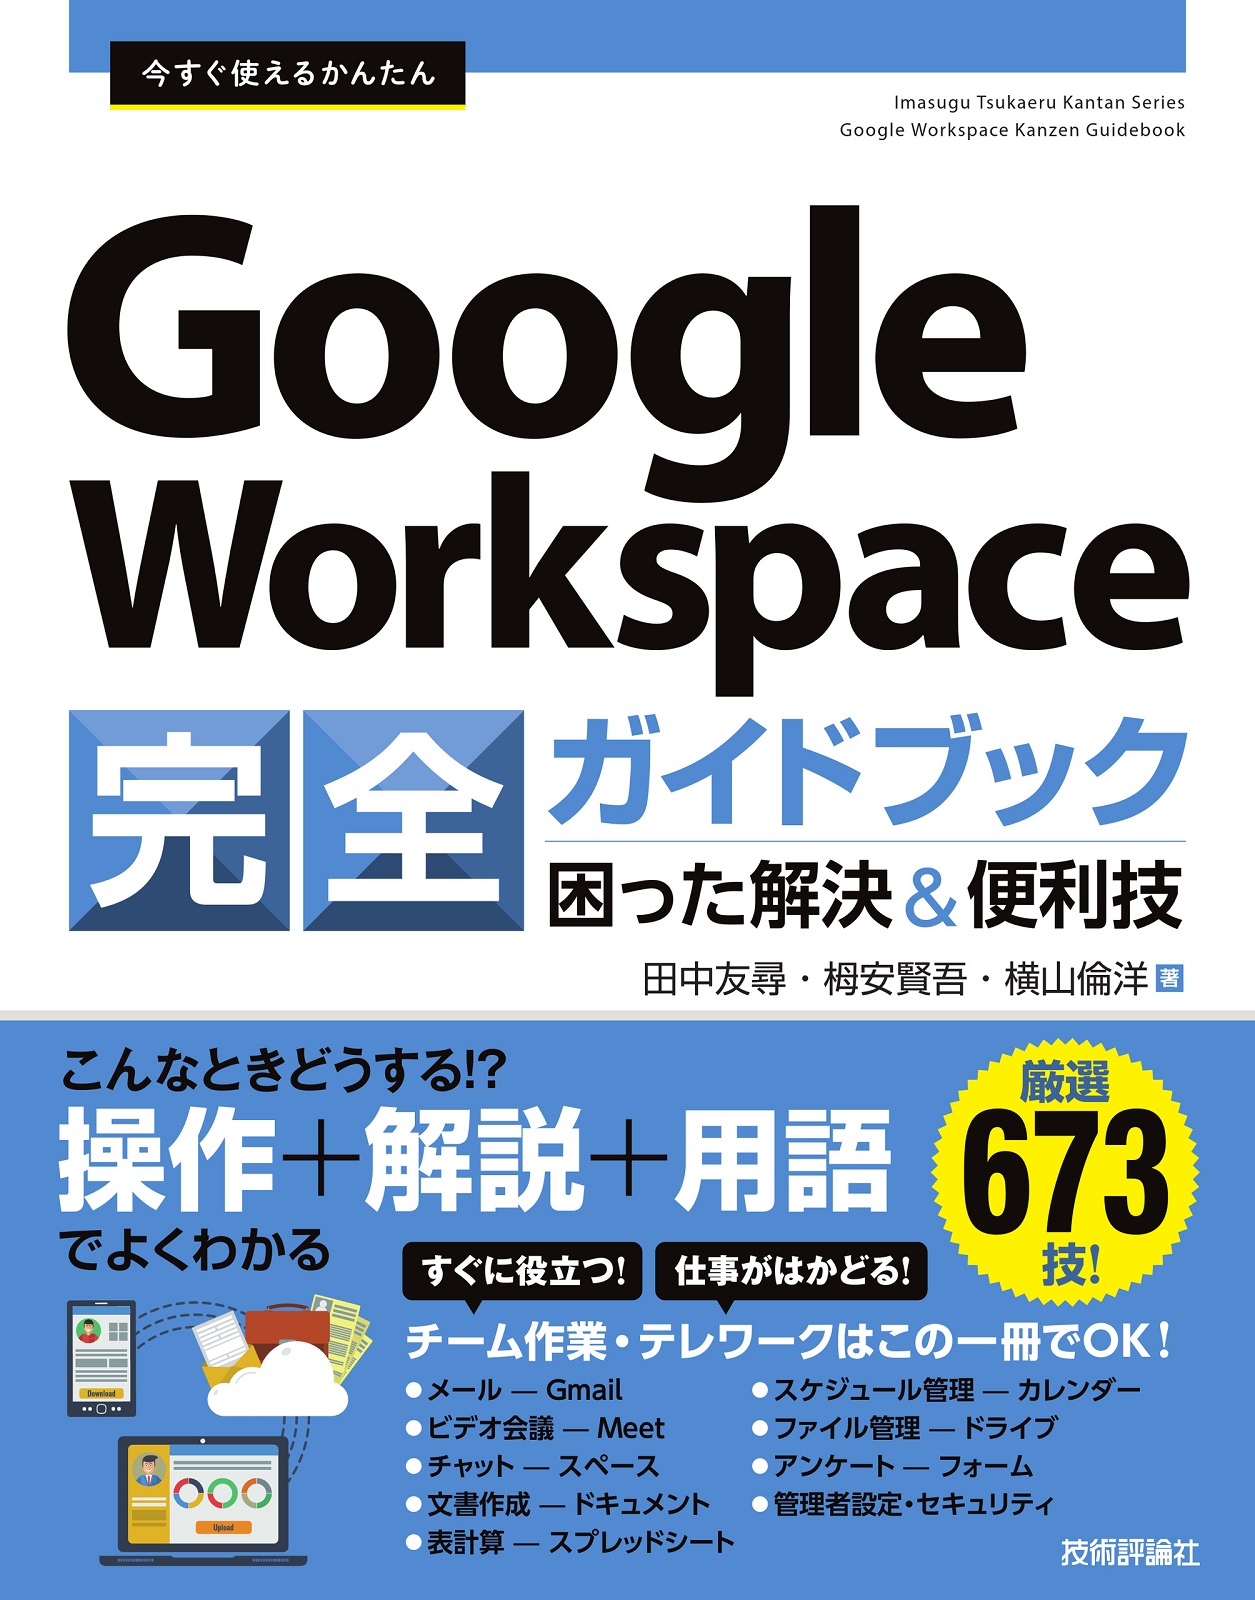 Workspace　今すぐ使えるかんたん　Google　完全ガイドブック　困った解決＆便利技：書籍案内｜技術評論社